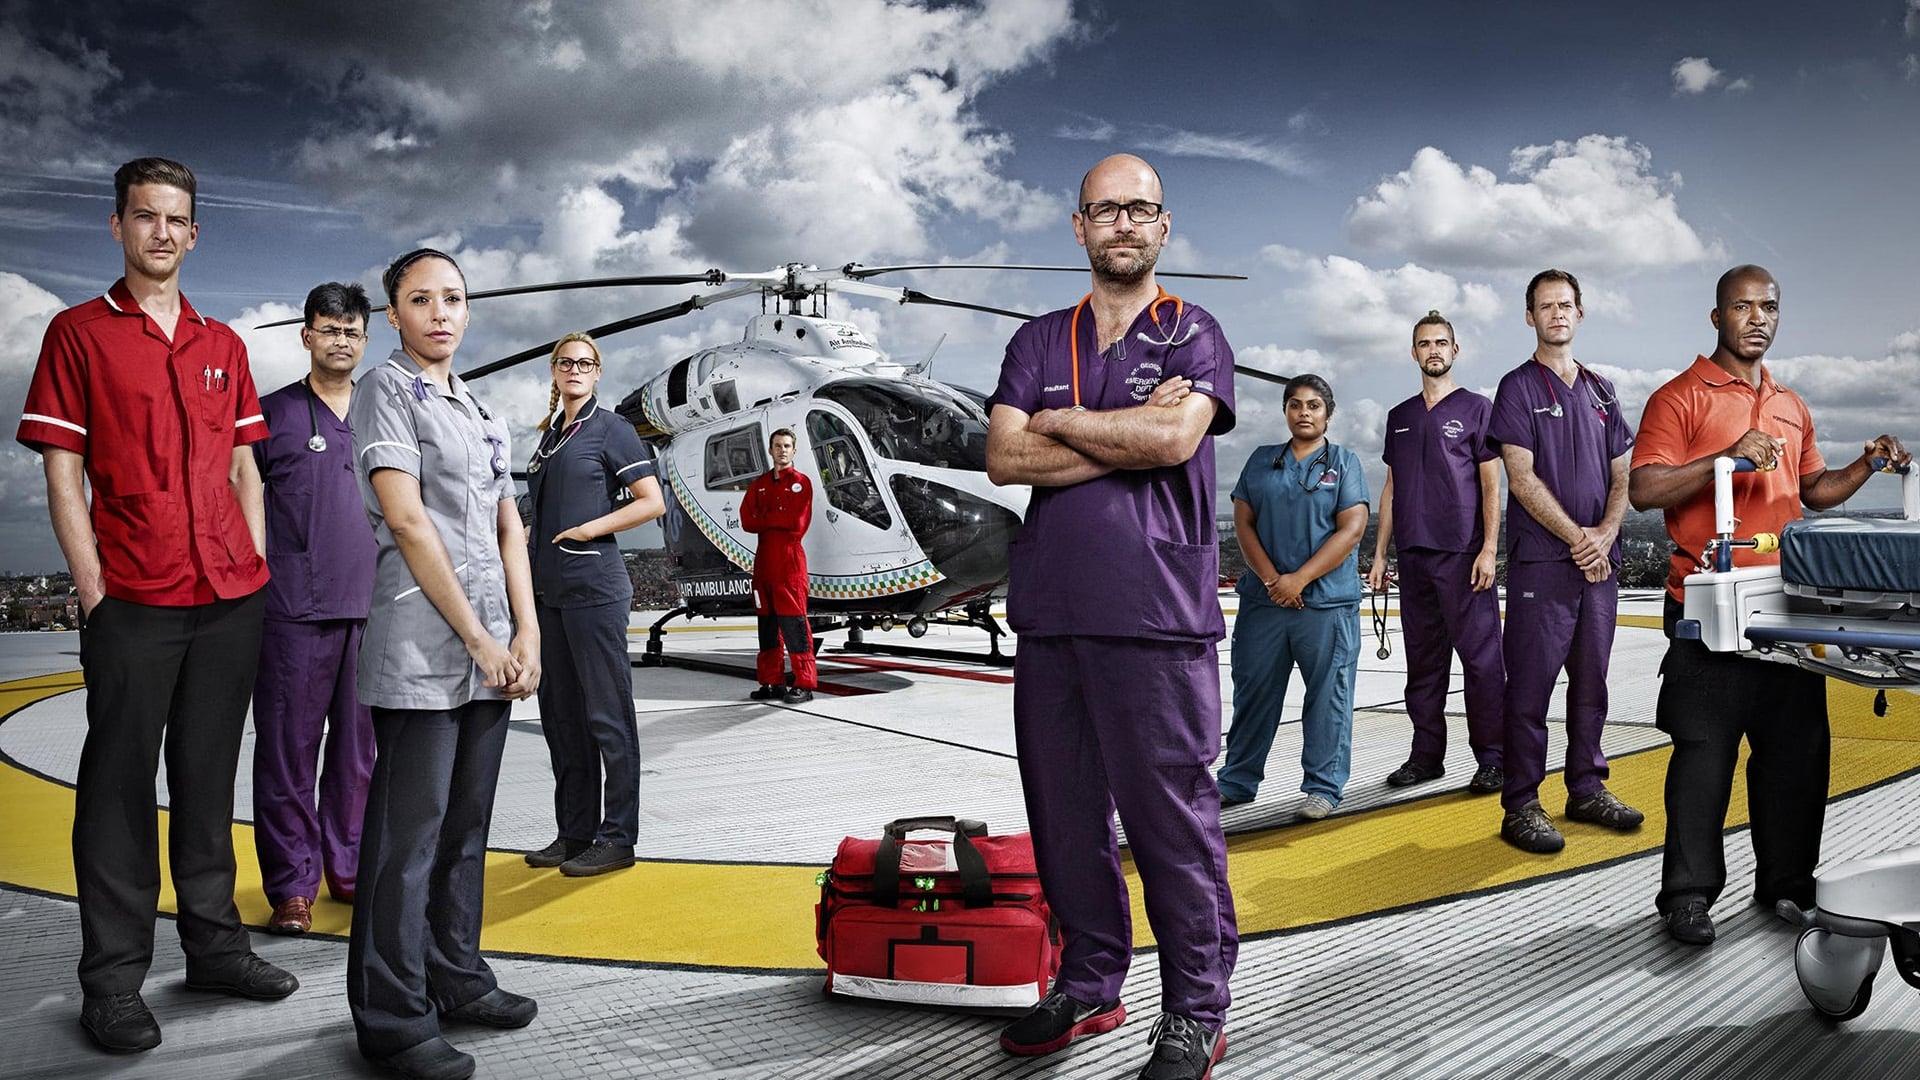 24 Hours in A&E backdrop